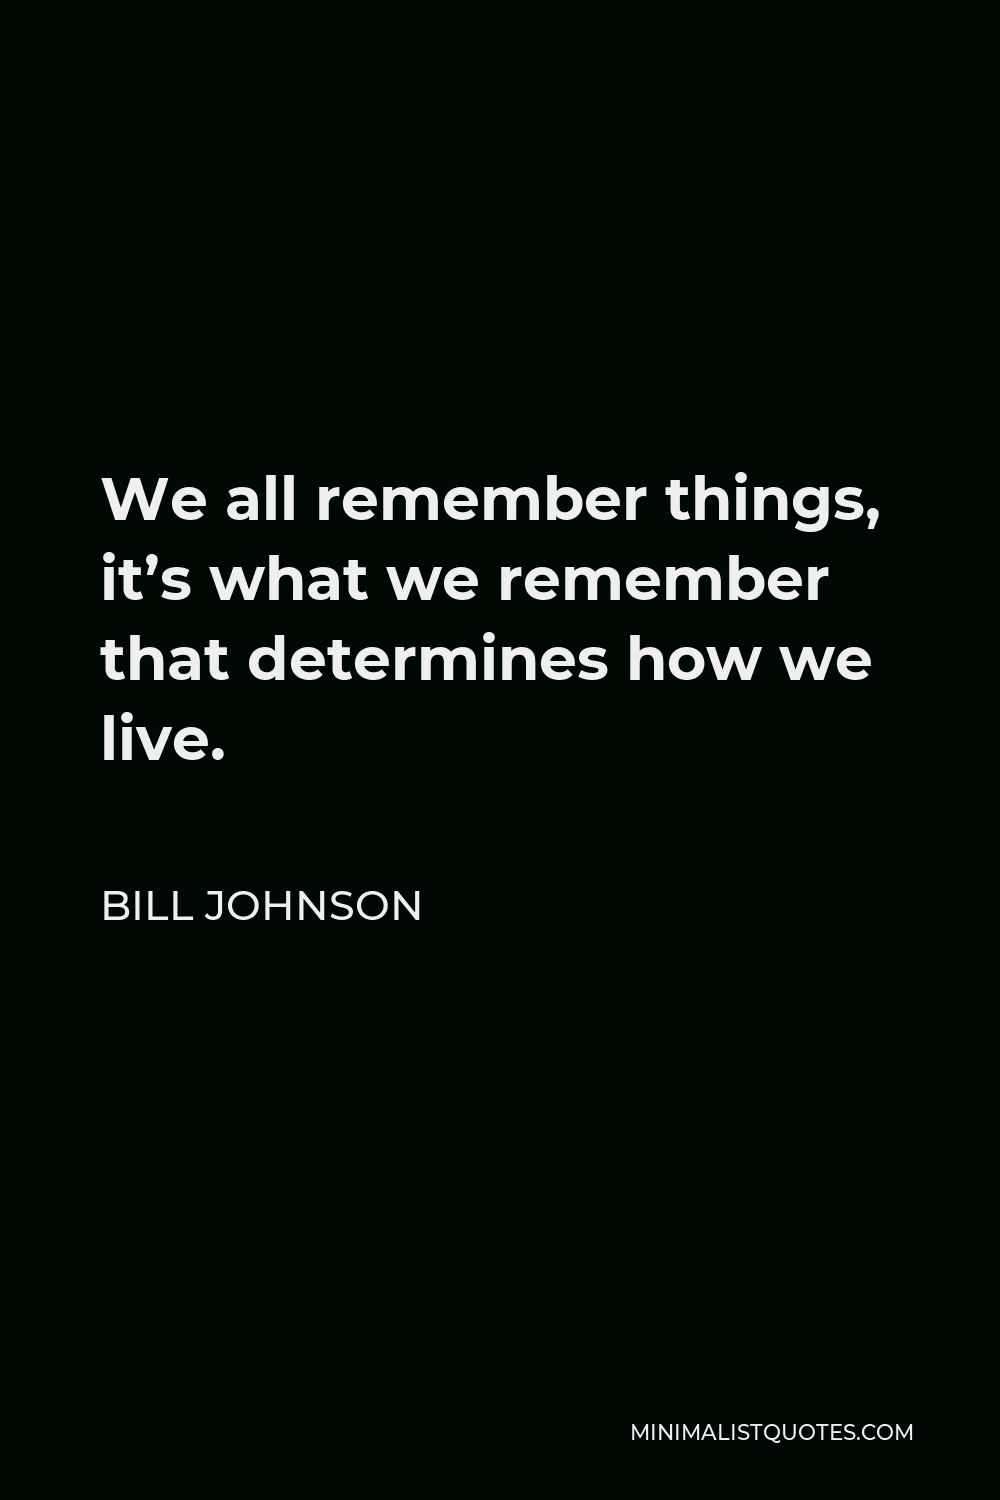 Bill Johnson Quote - We all remember things, it’s what we remember that determines how we live.